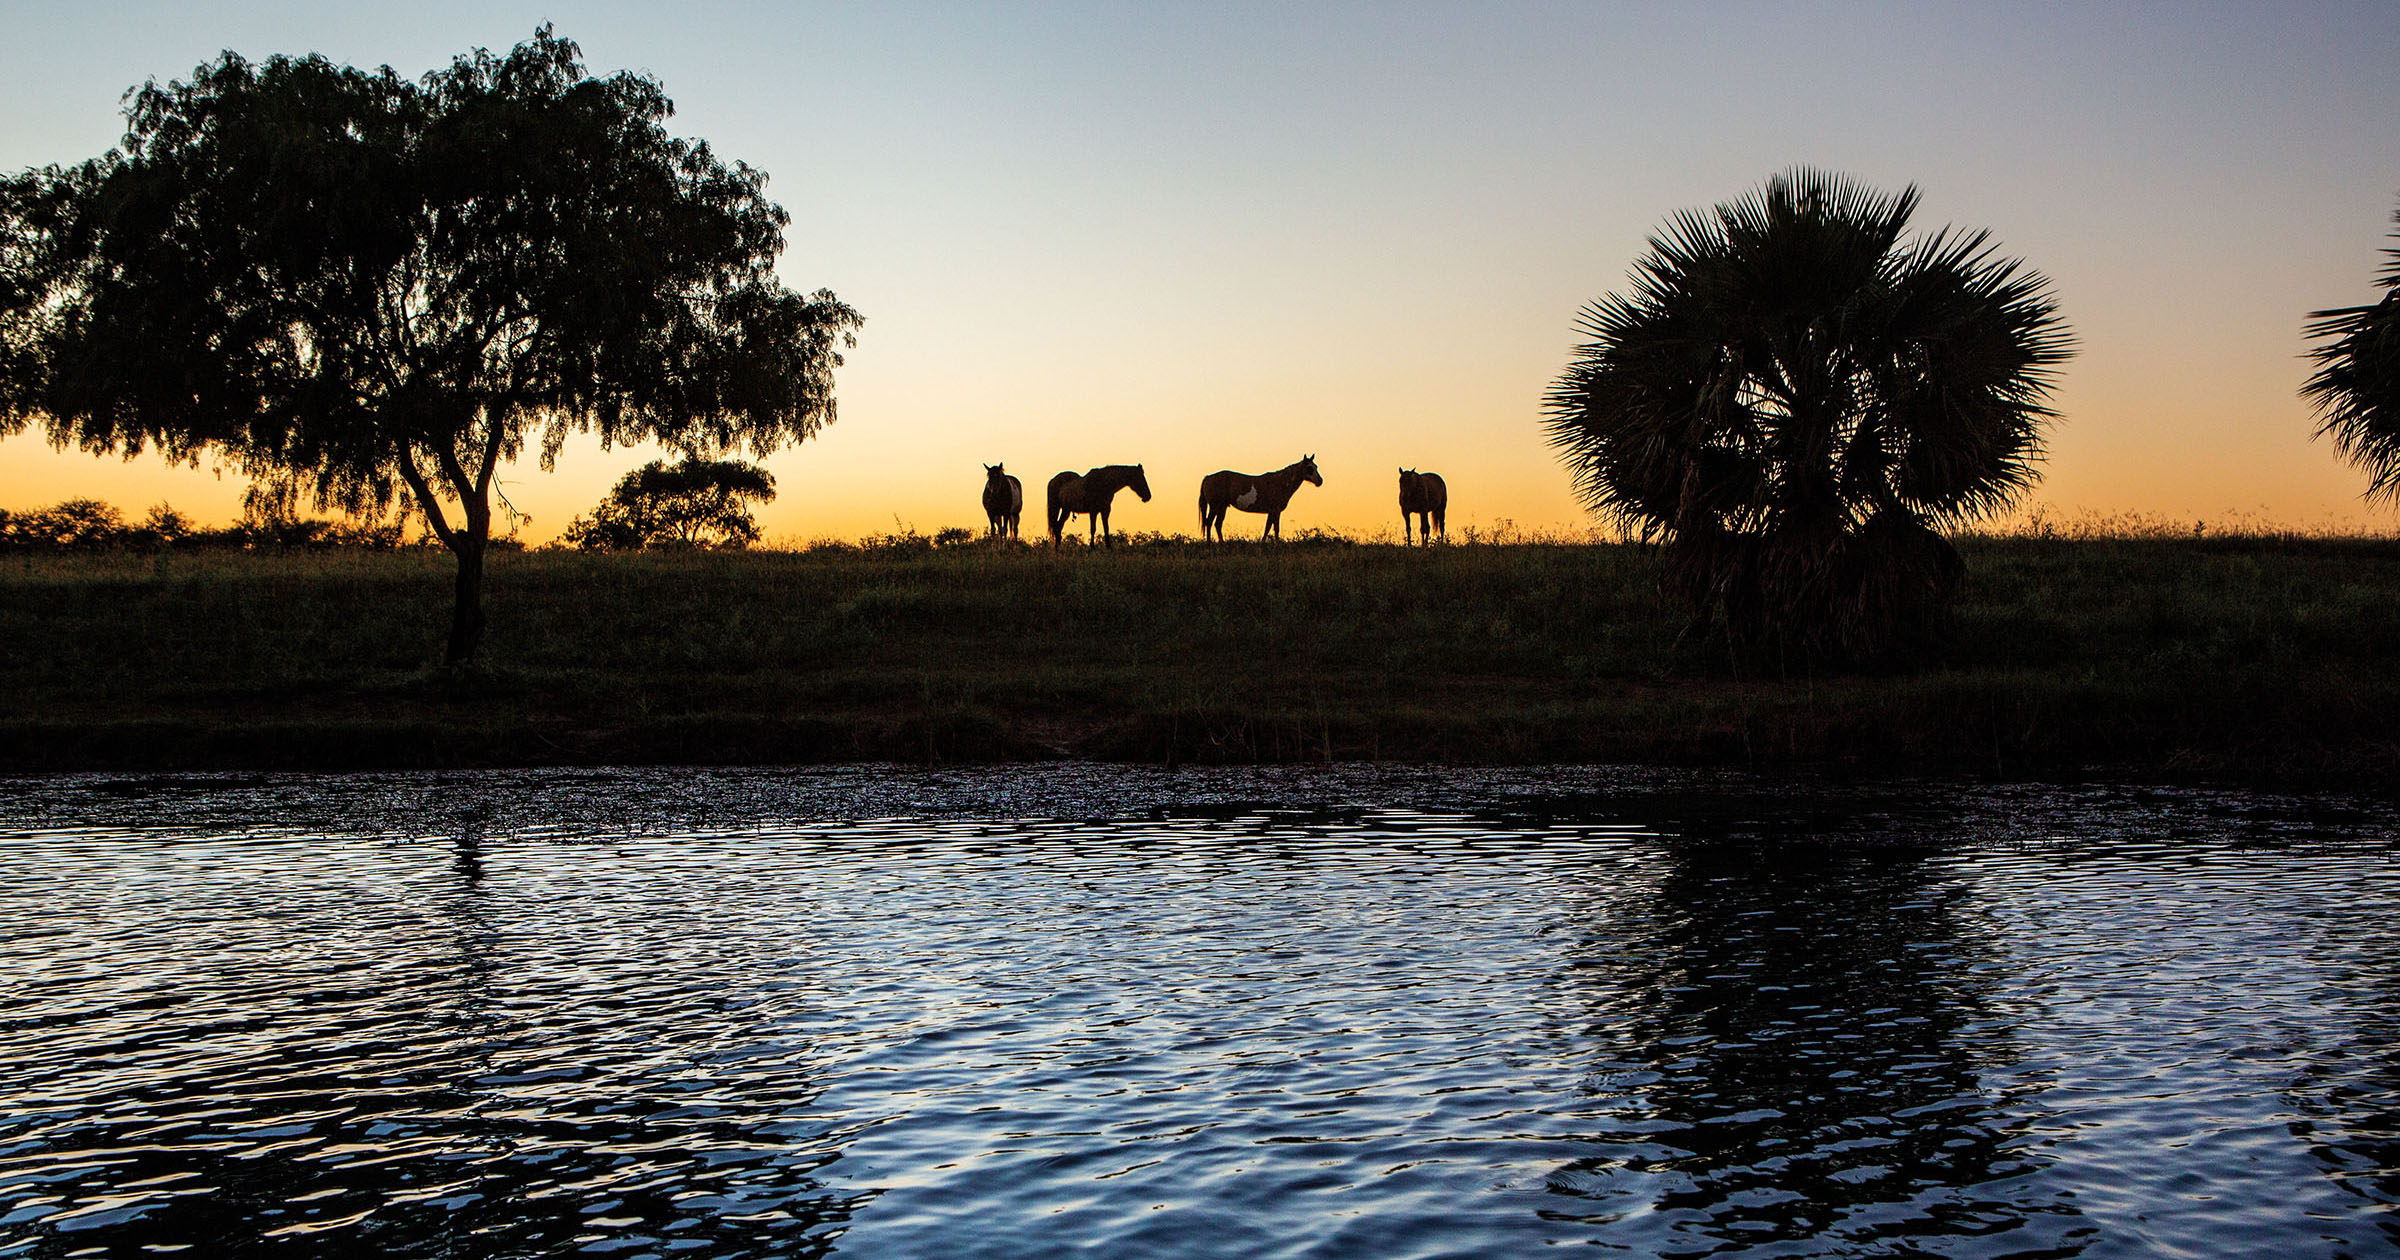 Palm trees, horses and a sunset in the background of a resaca